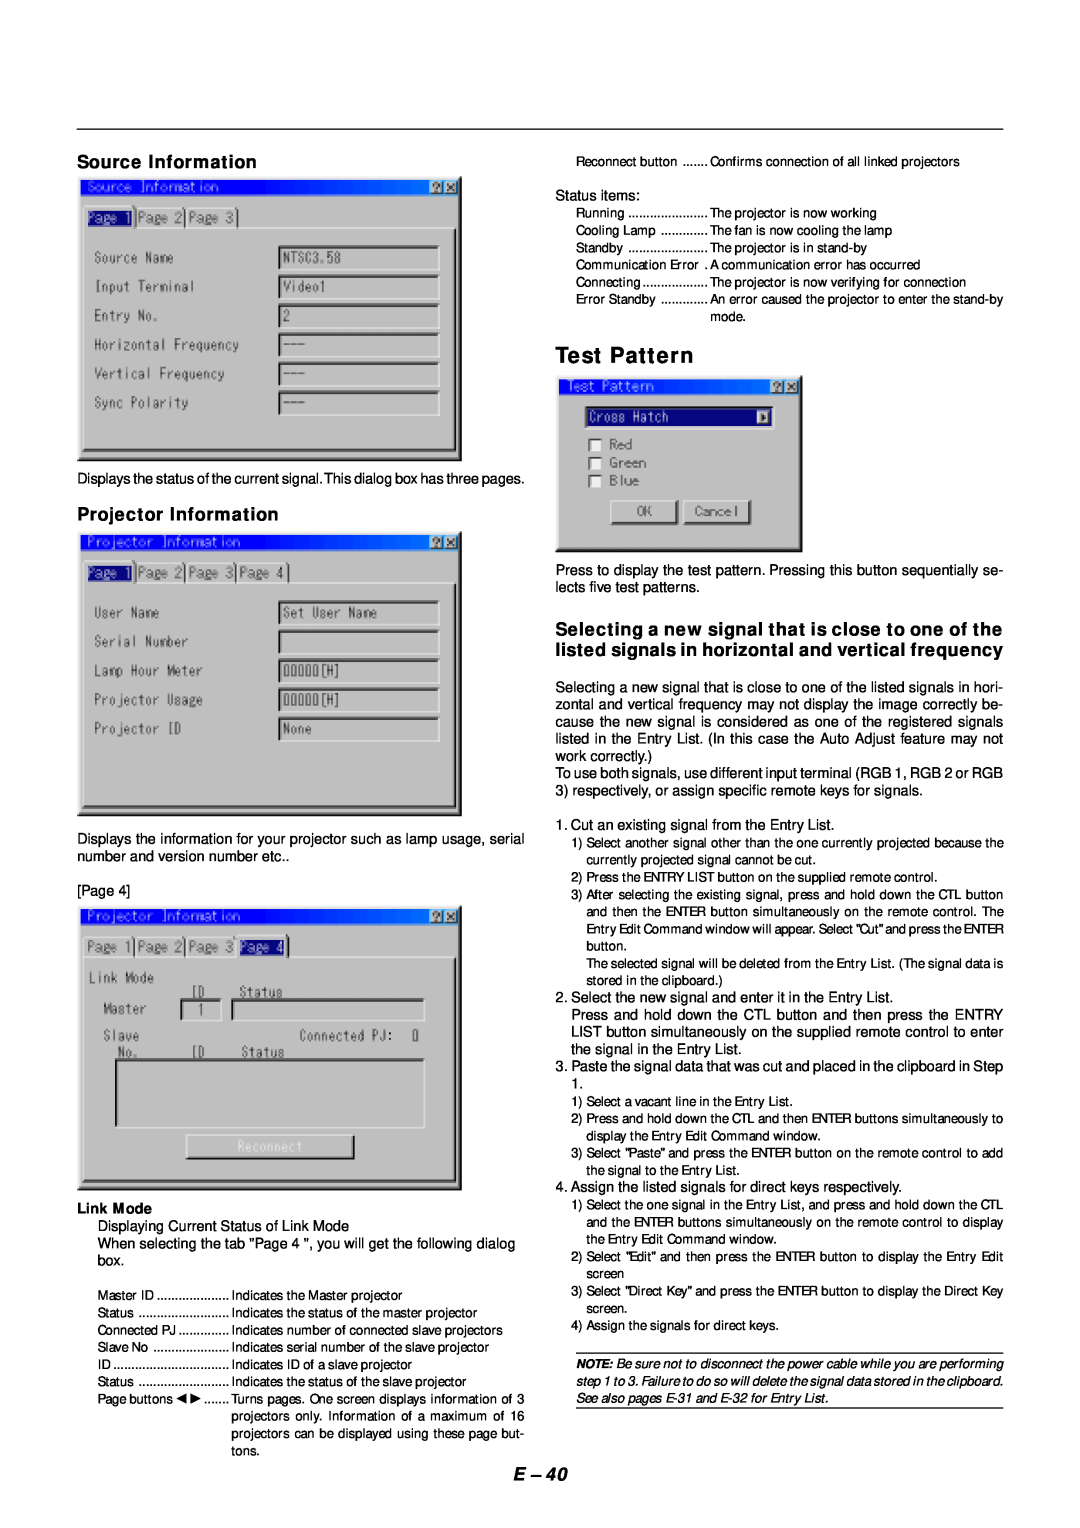 NEC SX4000 user manual Test Pattern, Source Information, Projector Information 